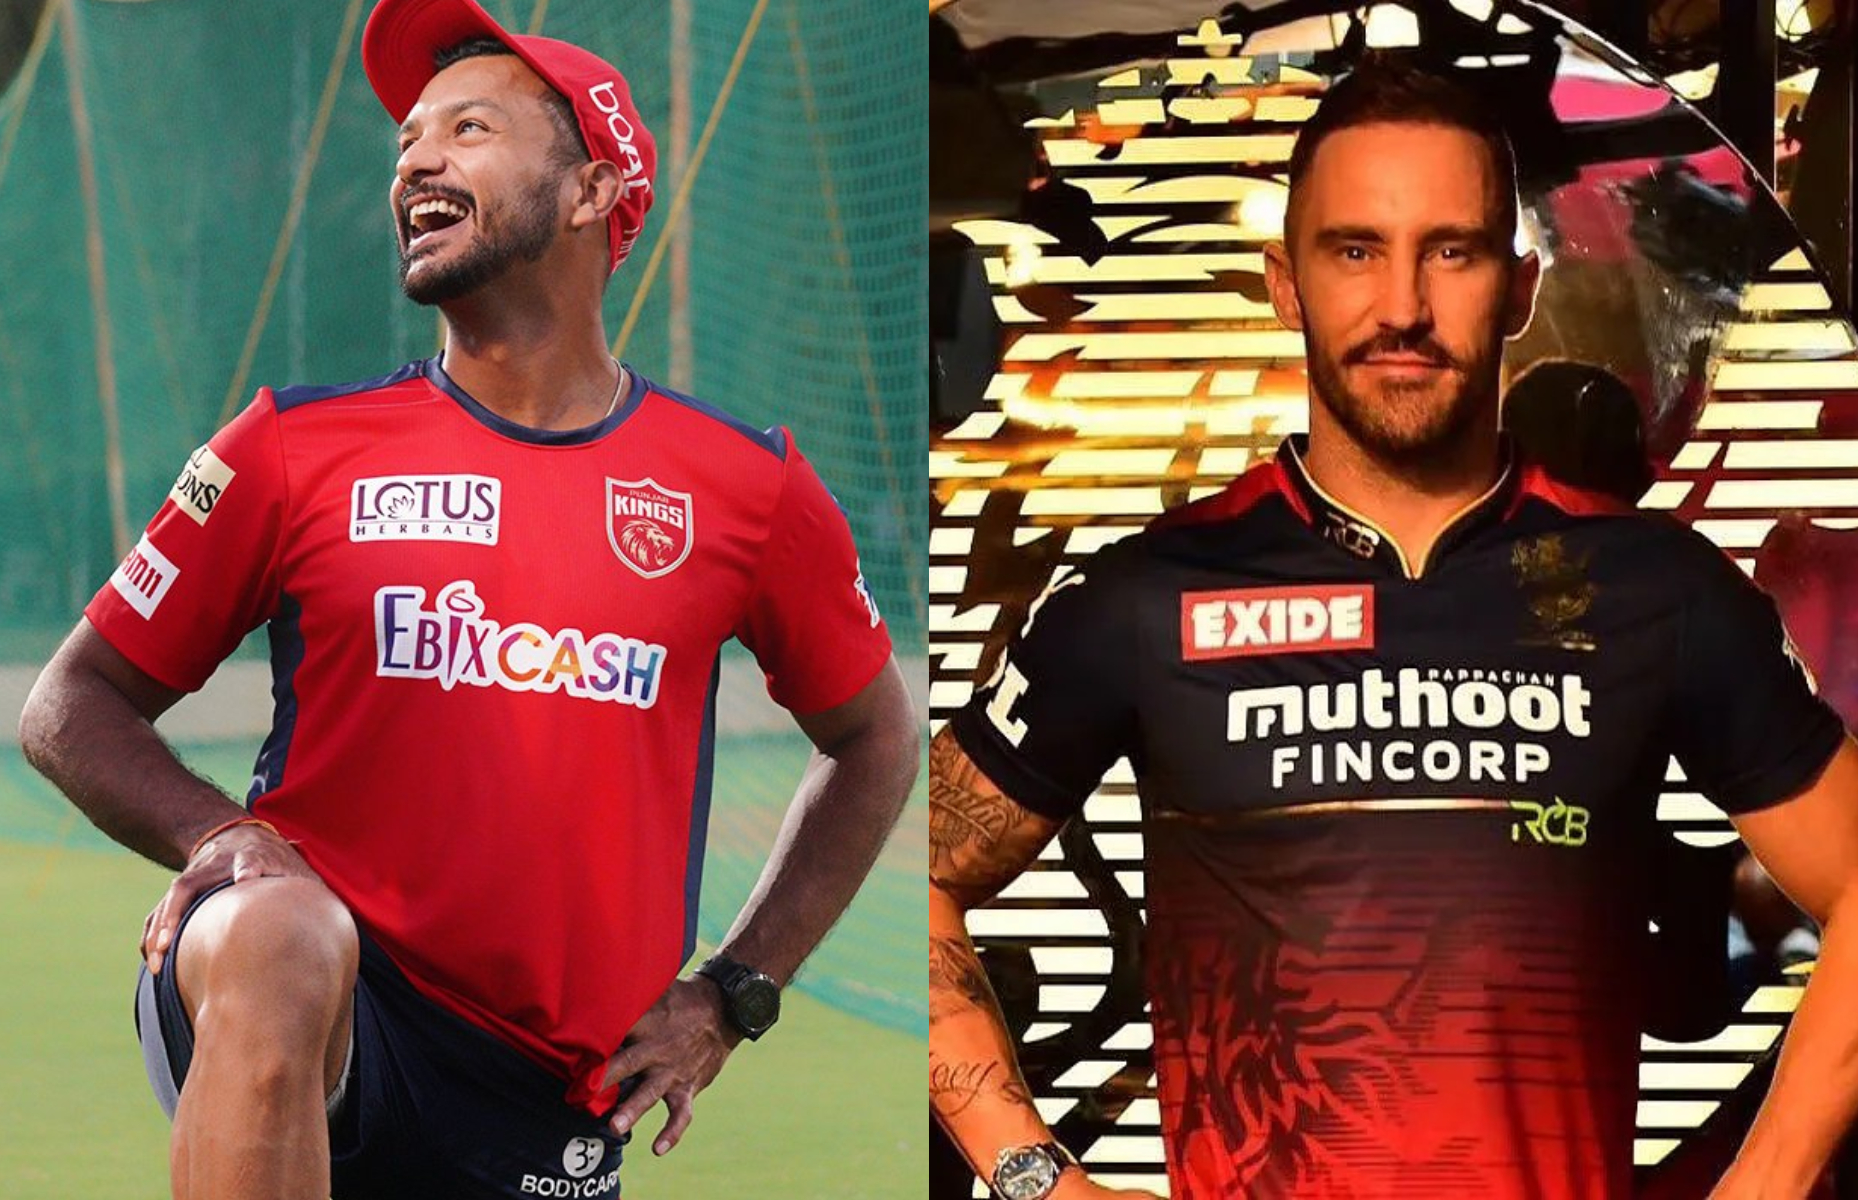 Both RCB and PBKS have new captains in Faf du Plessis and Mayank Agarwal | Twitter